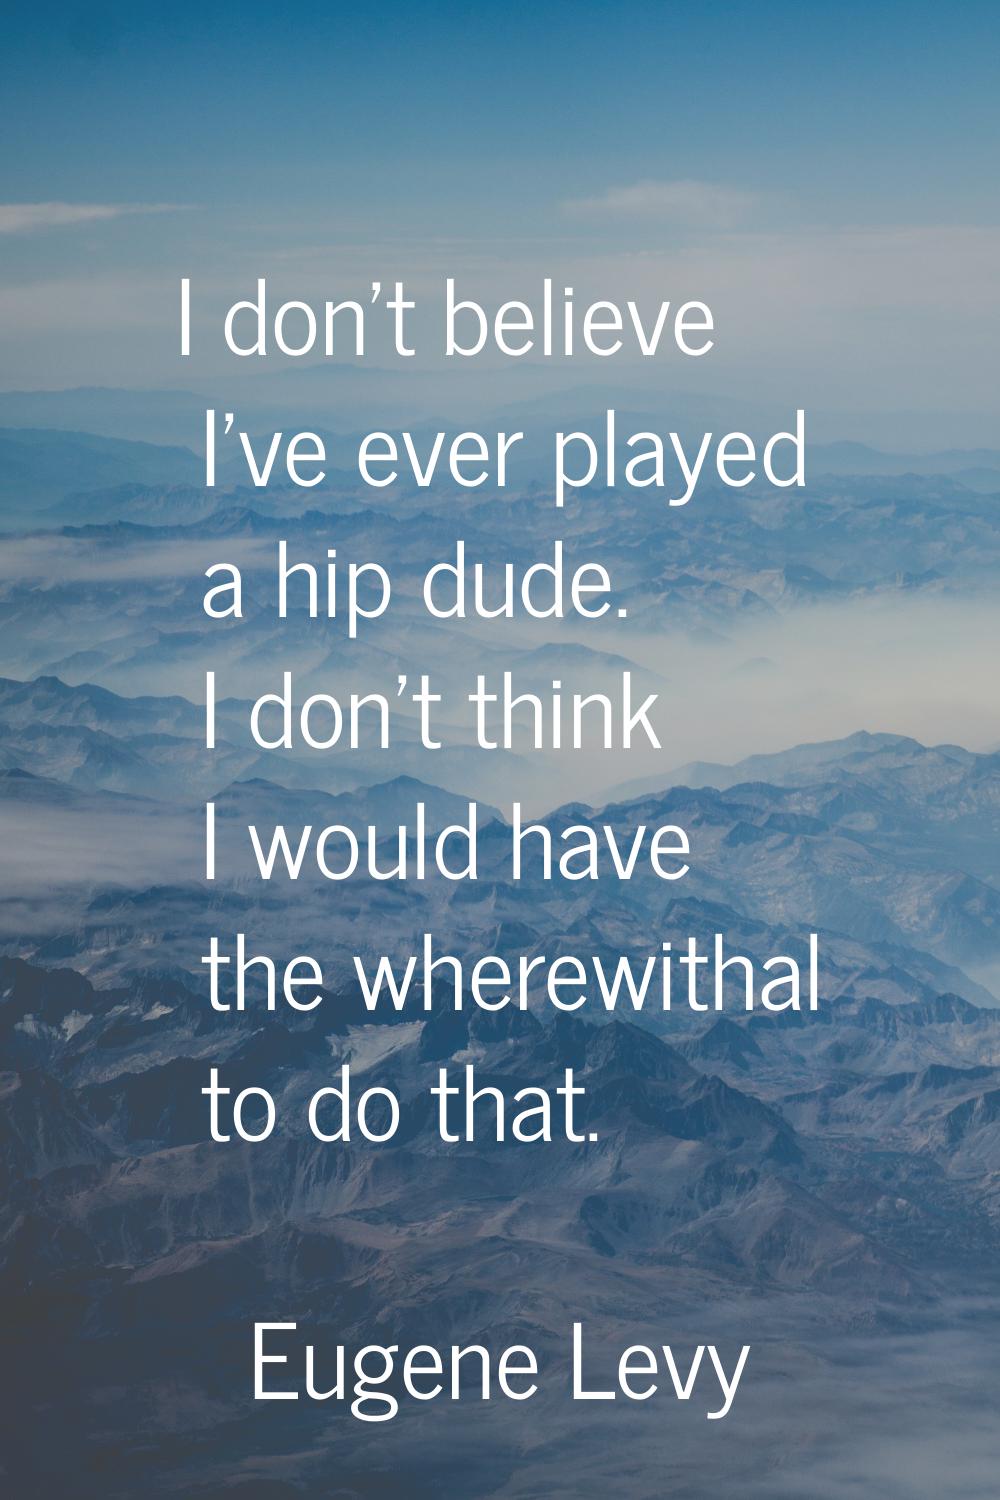 I don't believe I've ever played a hip dude. I don't think I would have the wherewithal to do that.